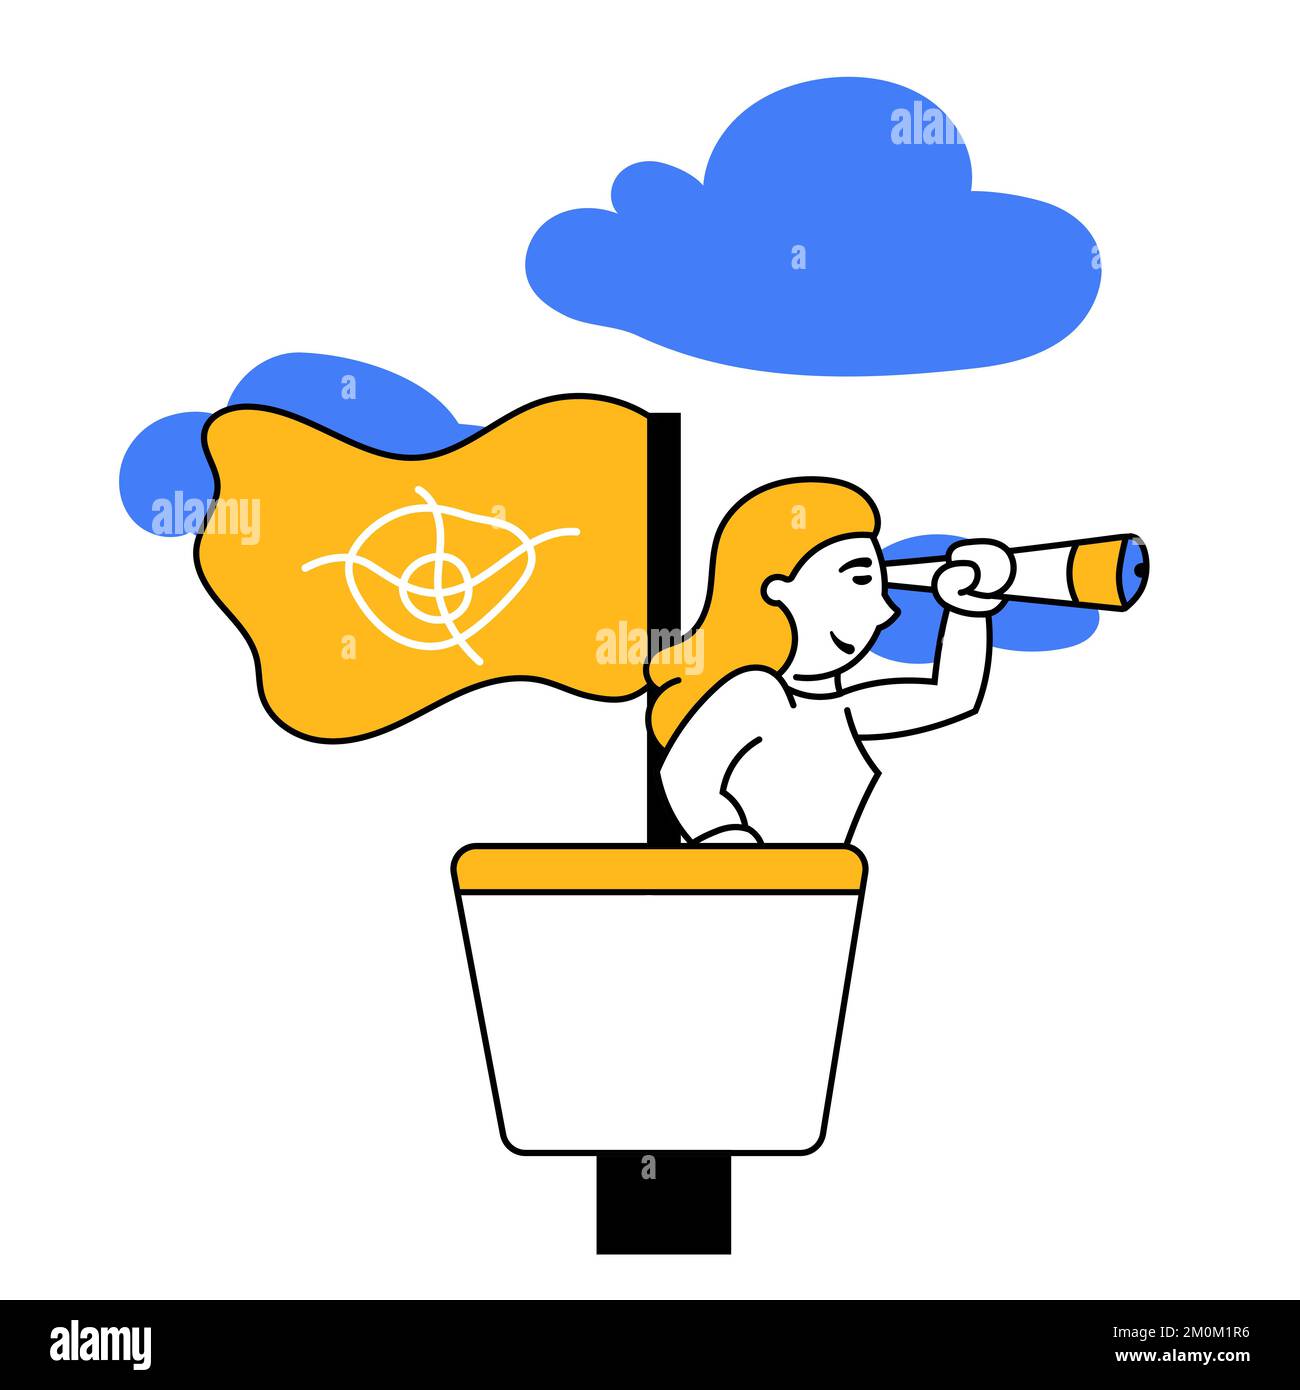 New business vision and strategy. Vector illustration. Looking forward new professional targets. Cooperation. Modern strategies Stock Vector